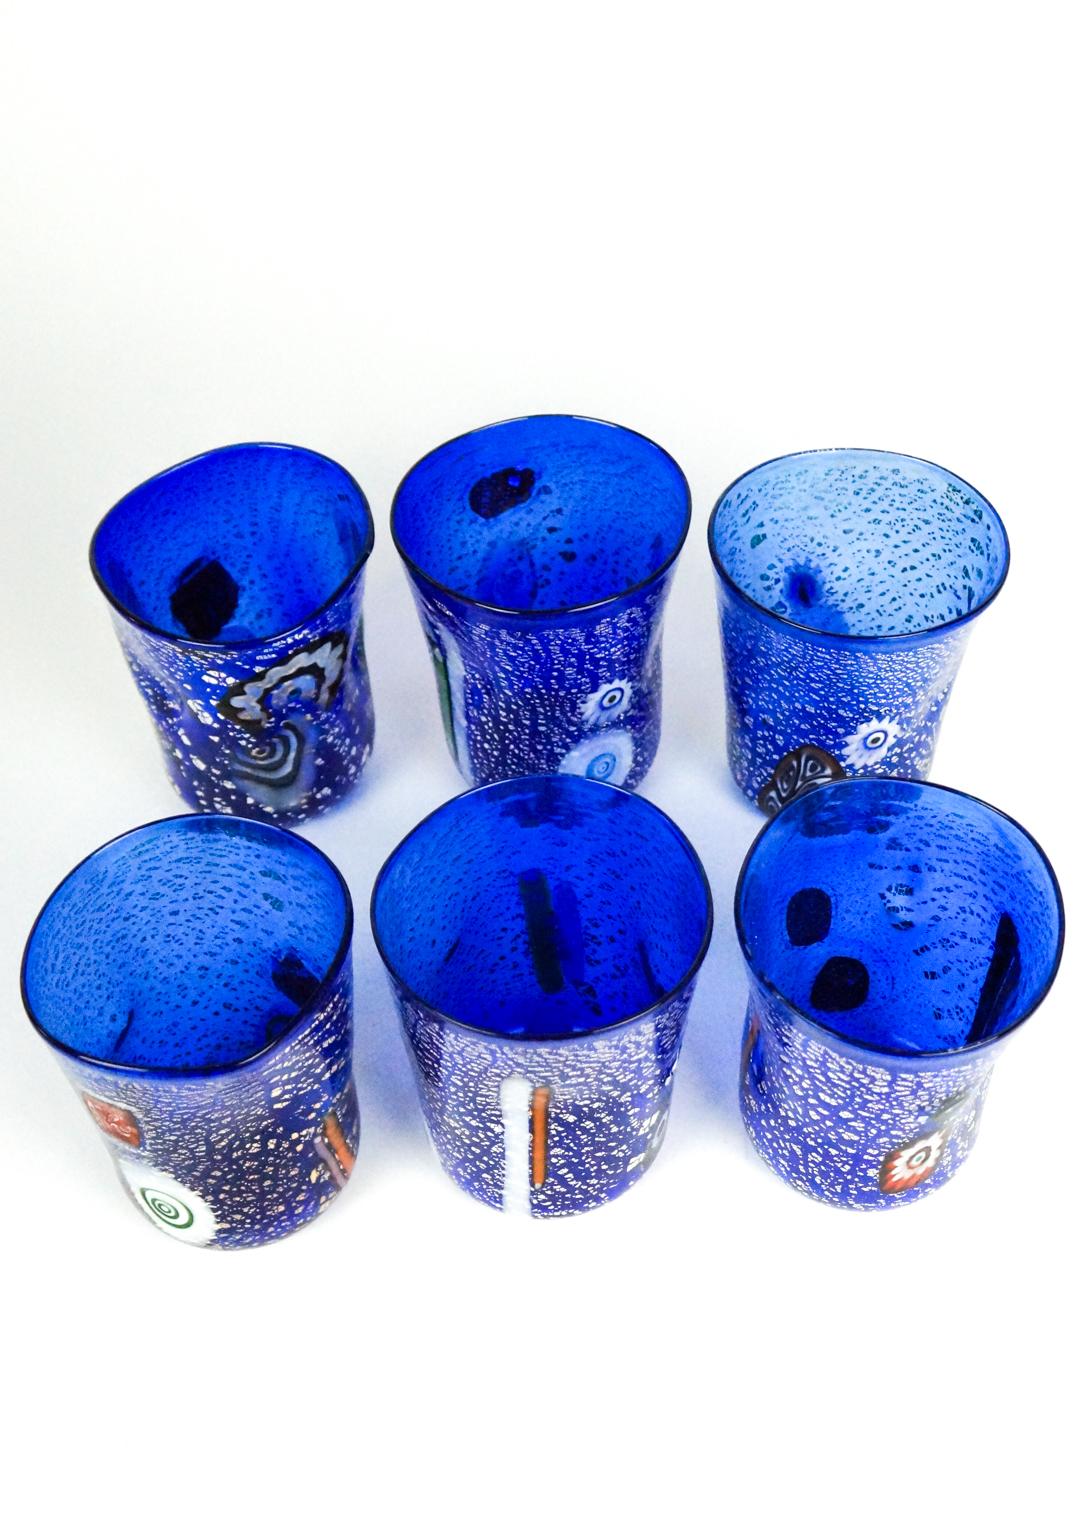 Magnificent series of 6 Murano drinking glasses.
This set is called 